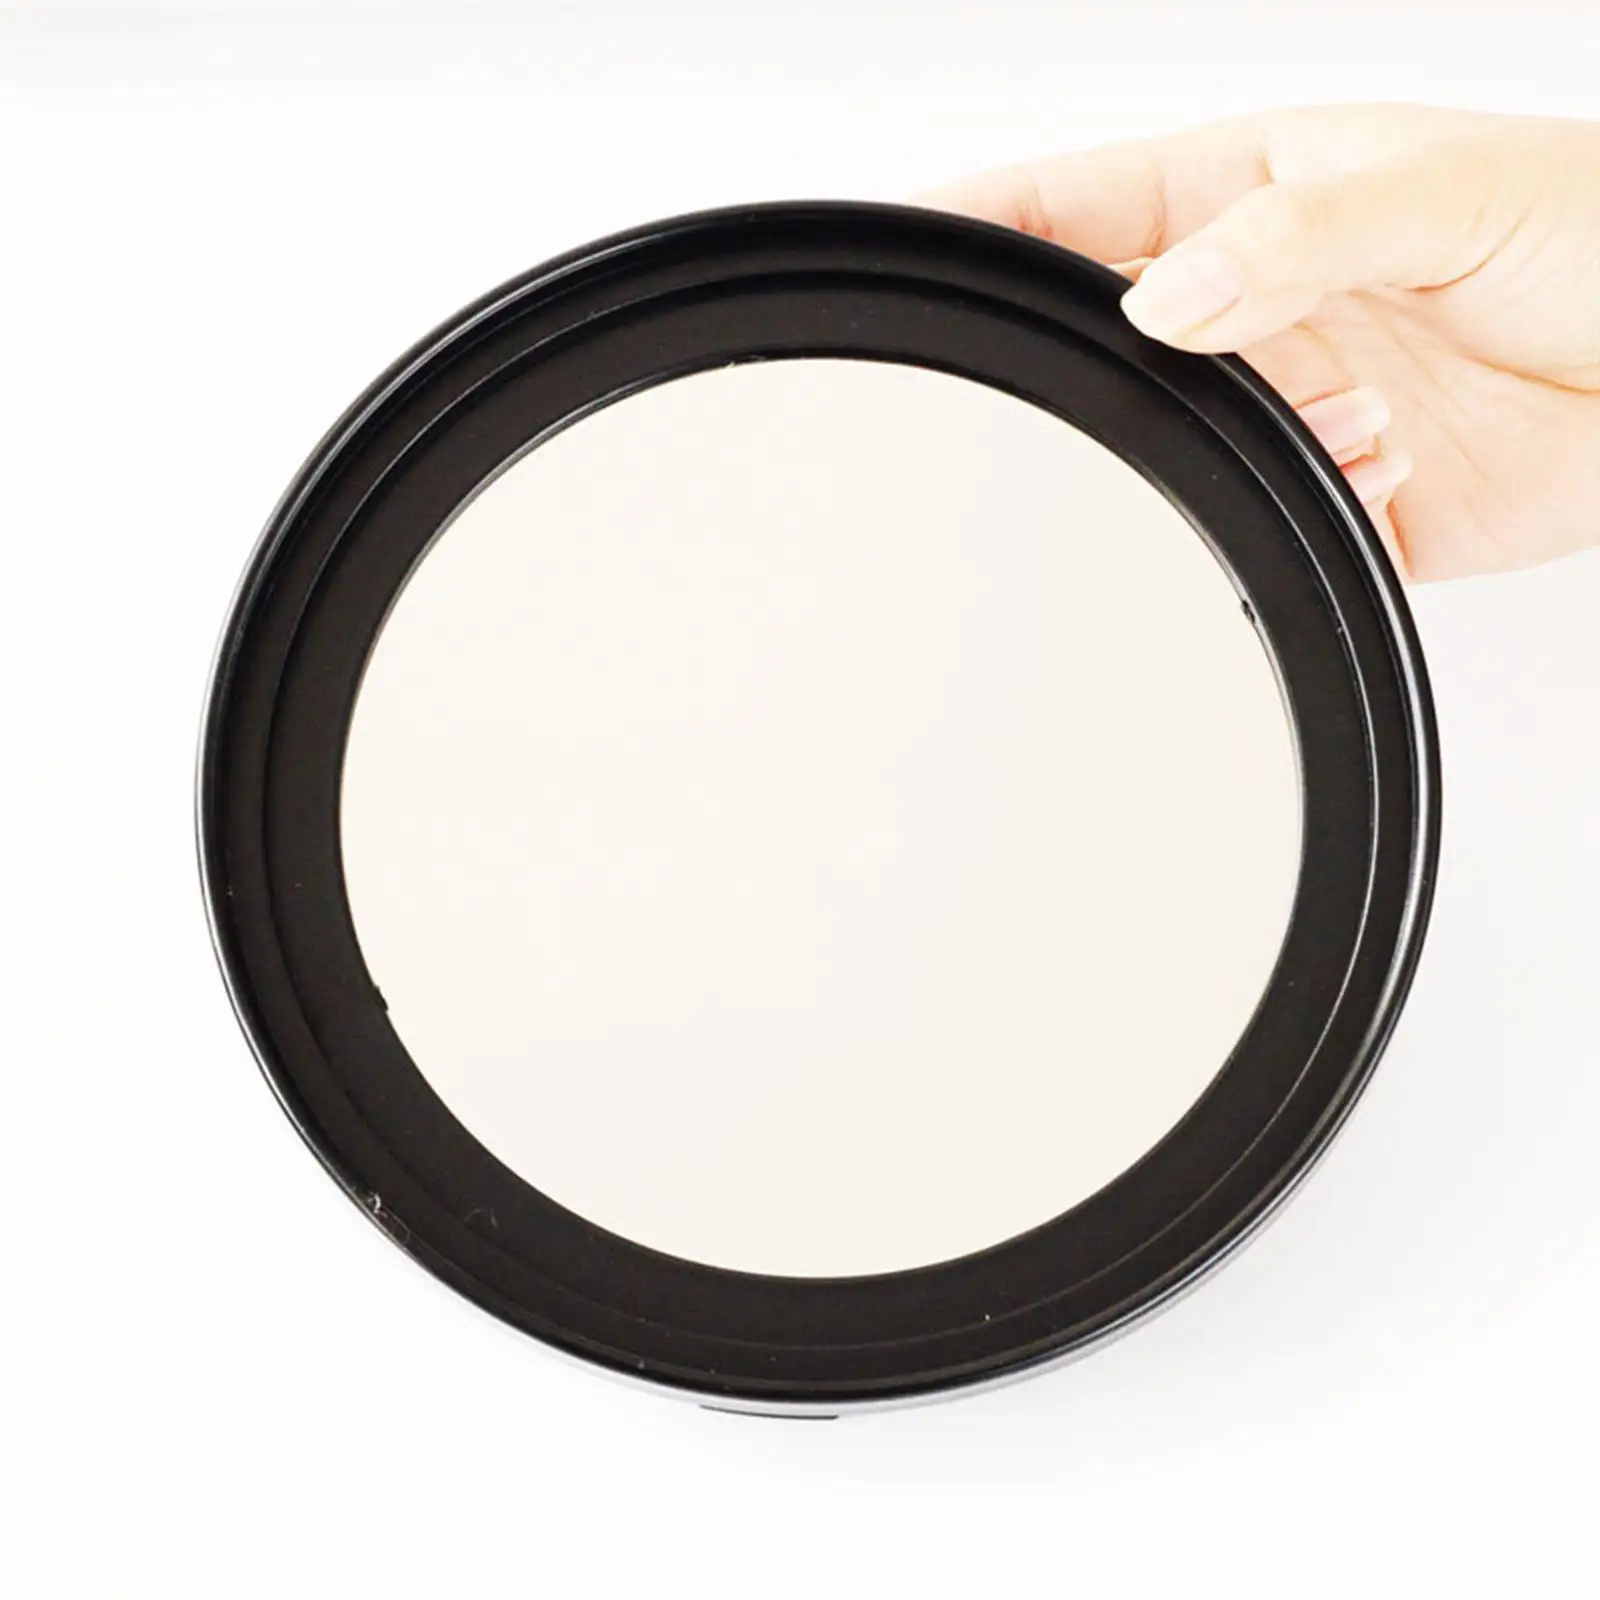 ND Filter Solar Filter Film 135mm Accessories Universal Solar for Astronomical Telescope Filters Sun filters for Beginners